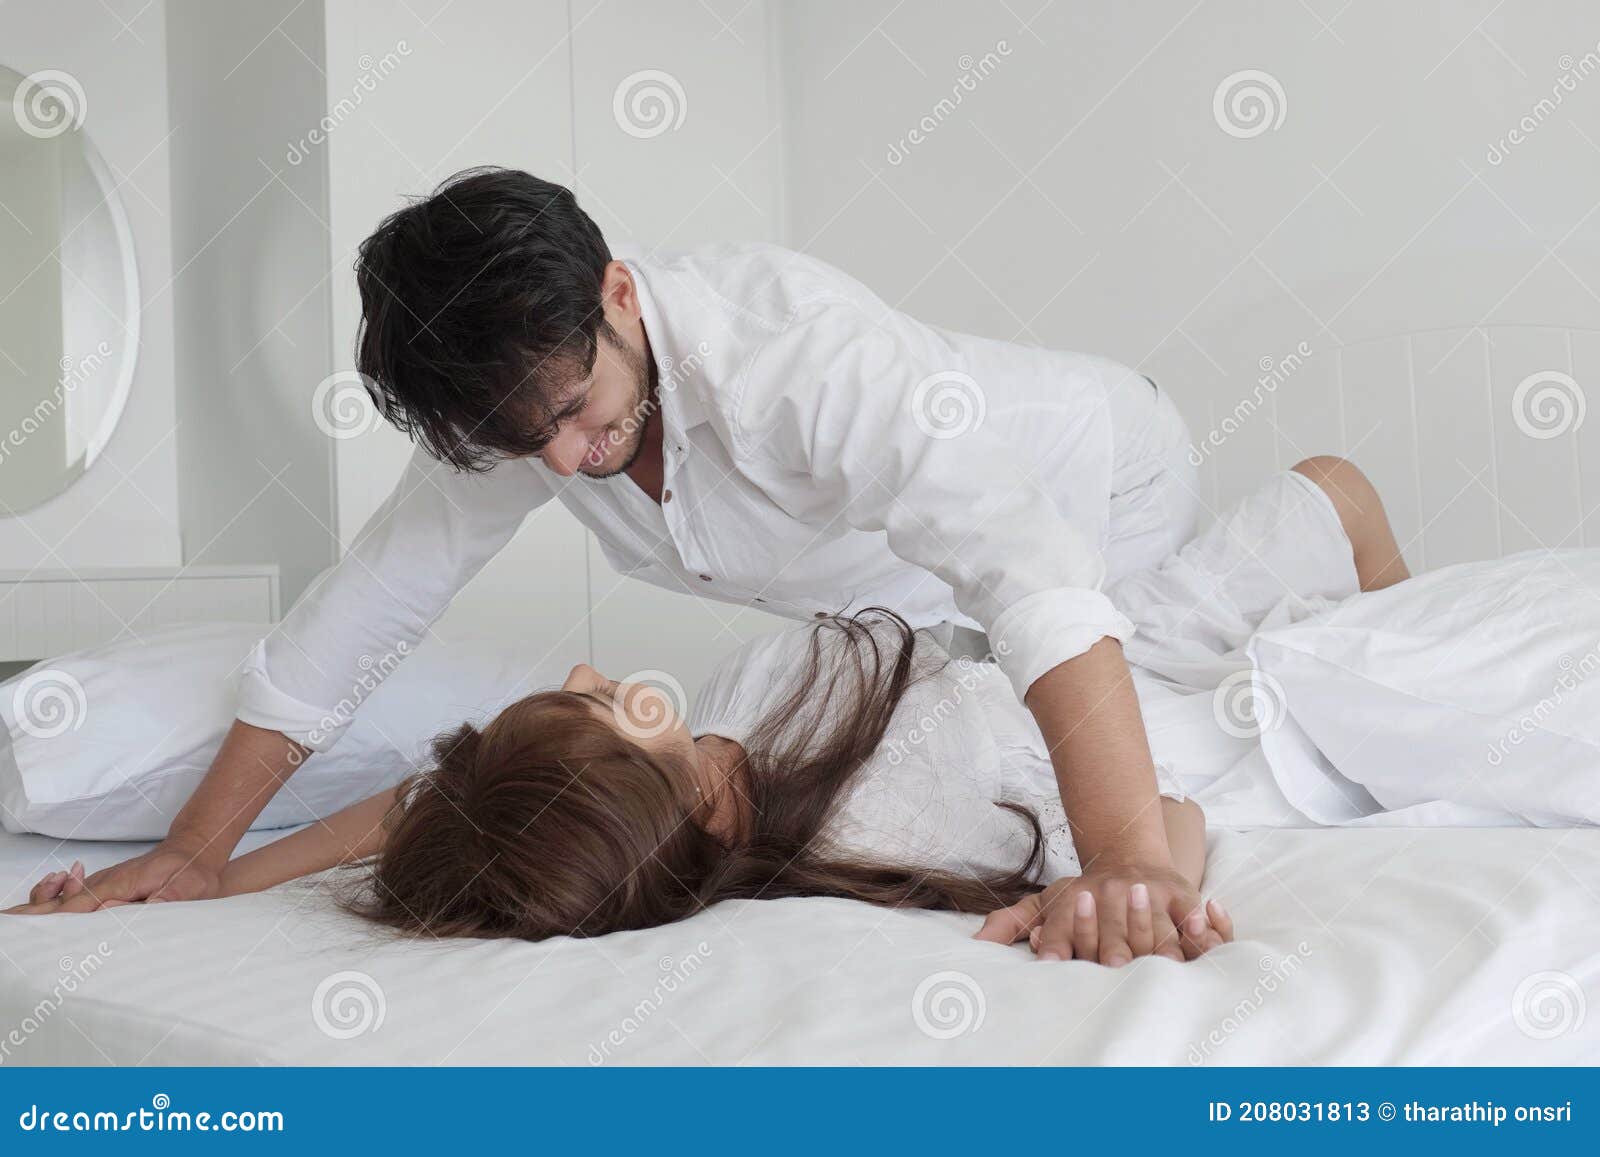 A Romantic Couple in Bedroom Stock Image - Image of romantic ...